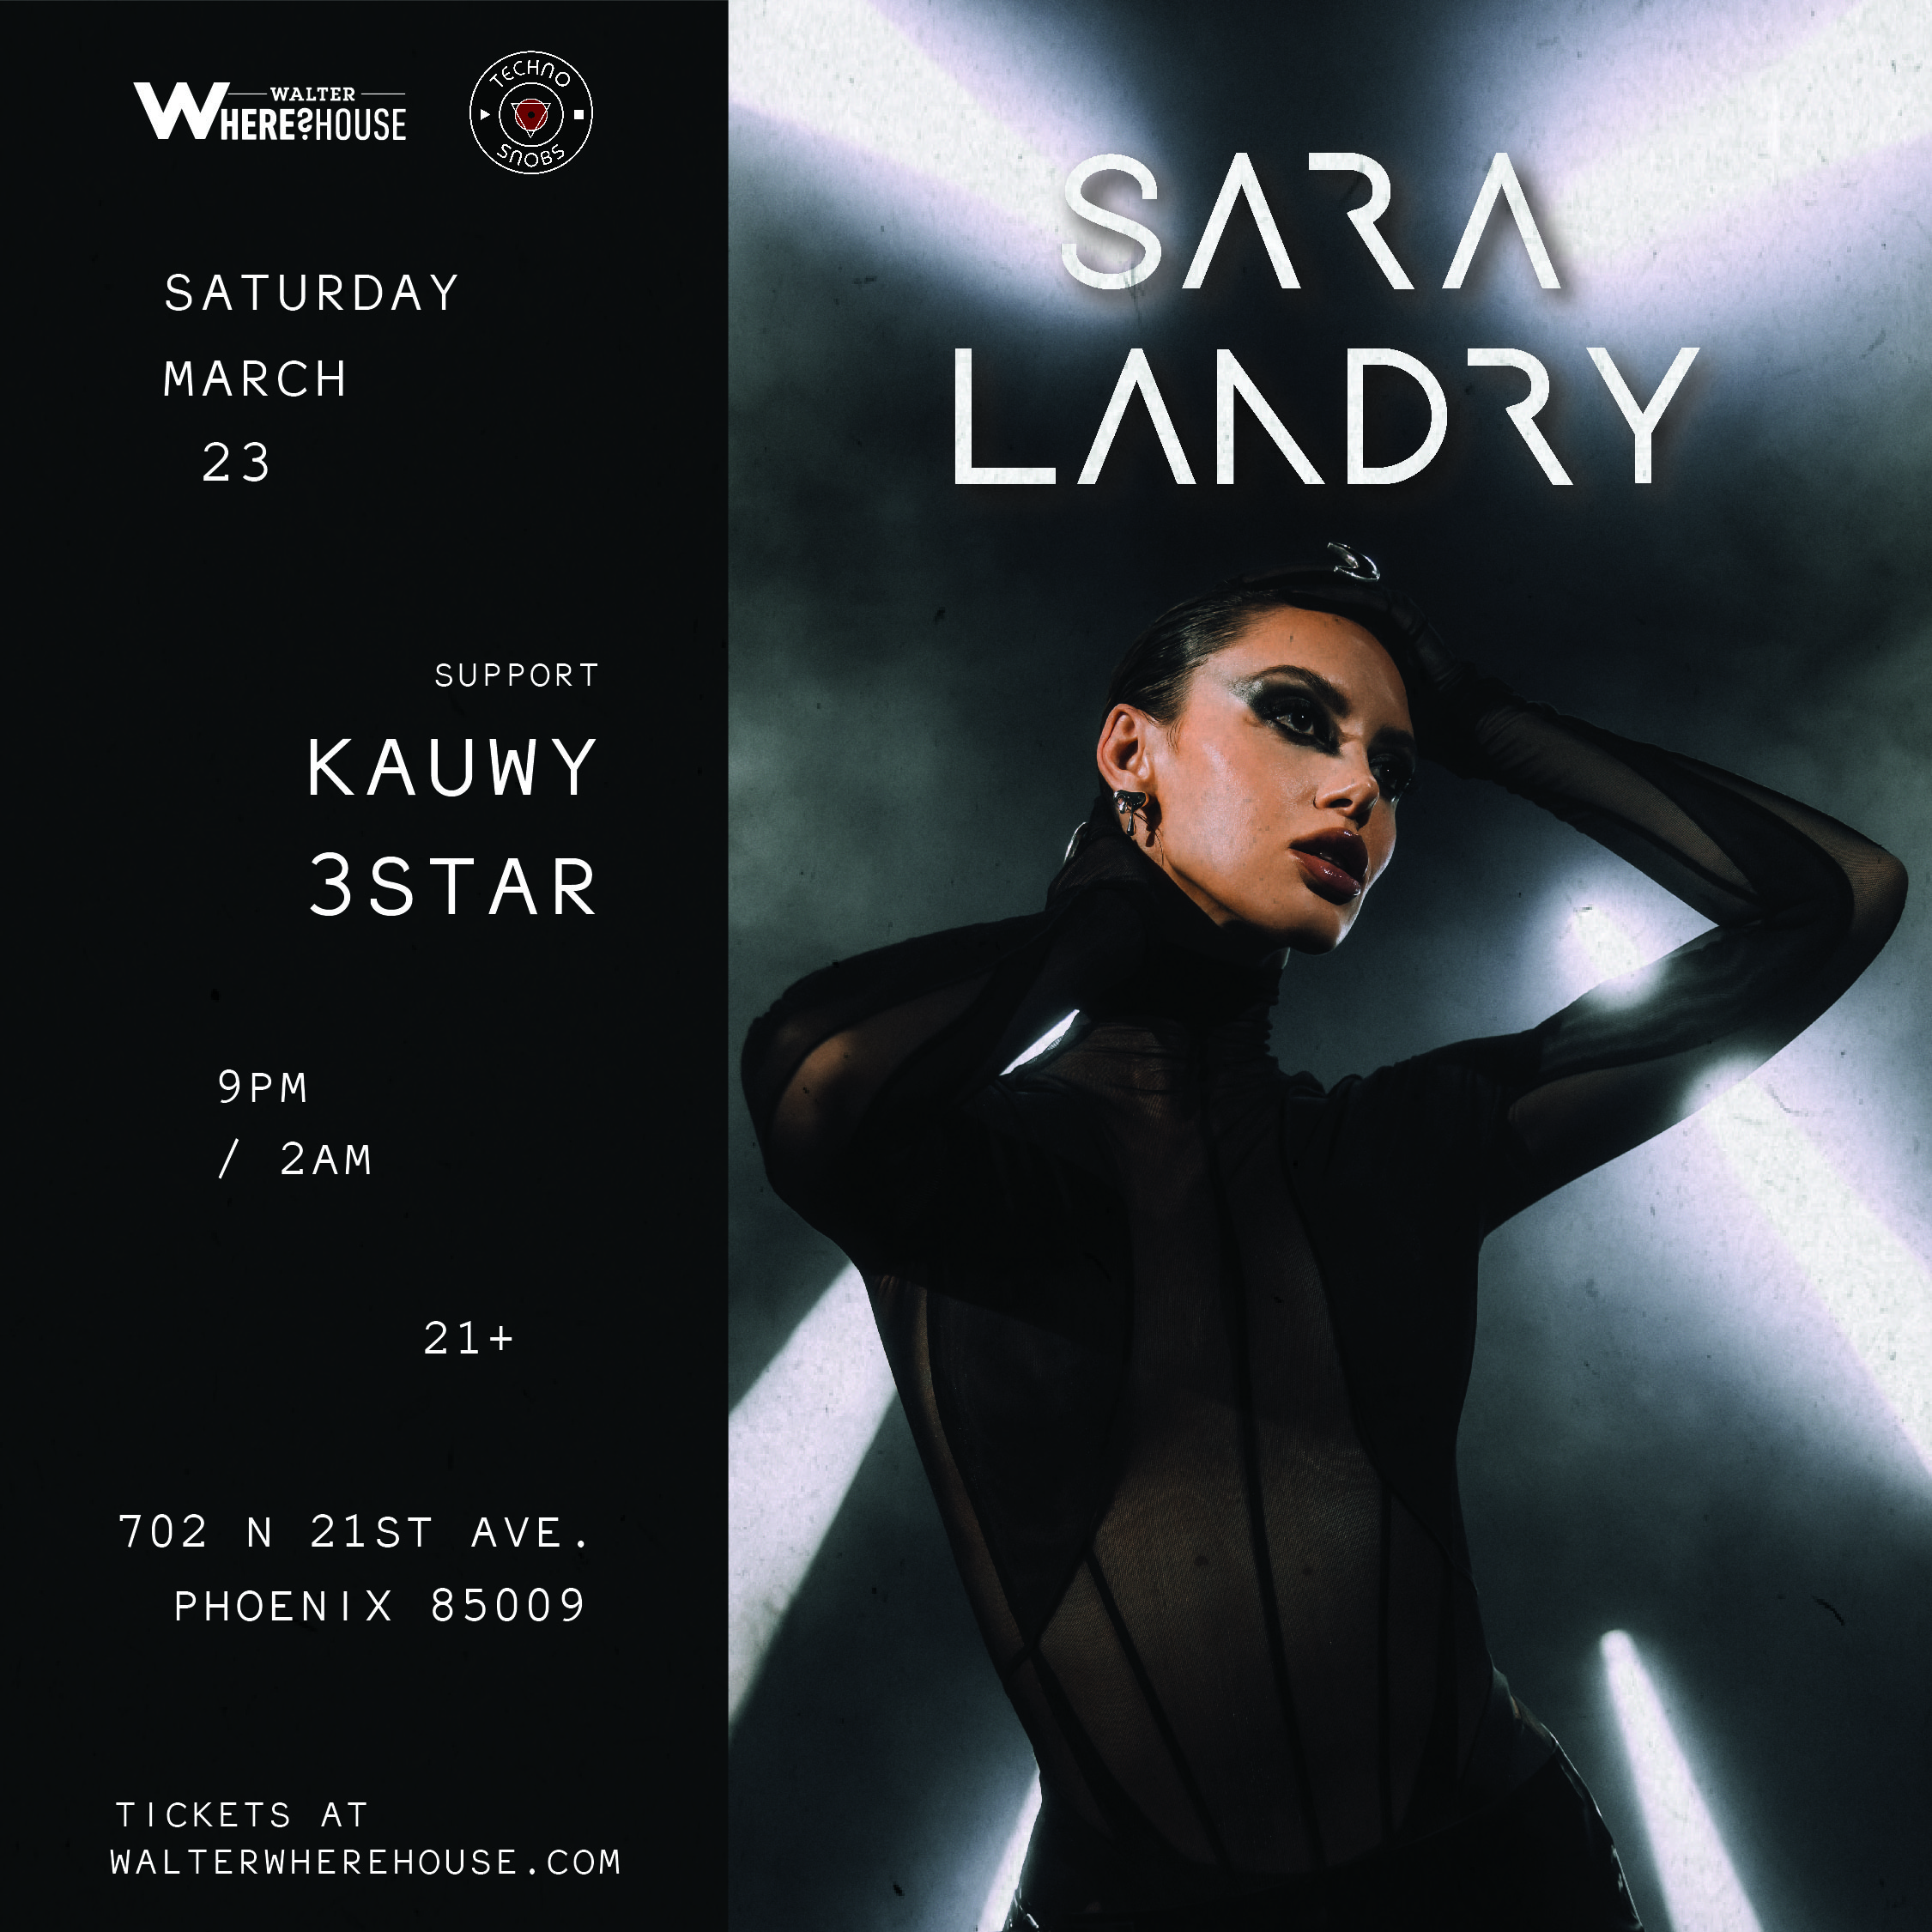 Buy tickets to Techno Snobs: Sara Landry at Walter Where?House in ...